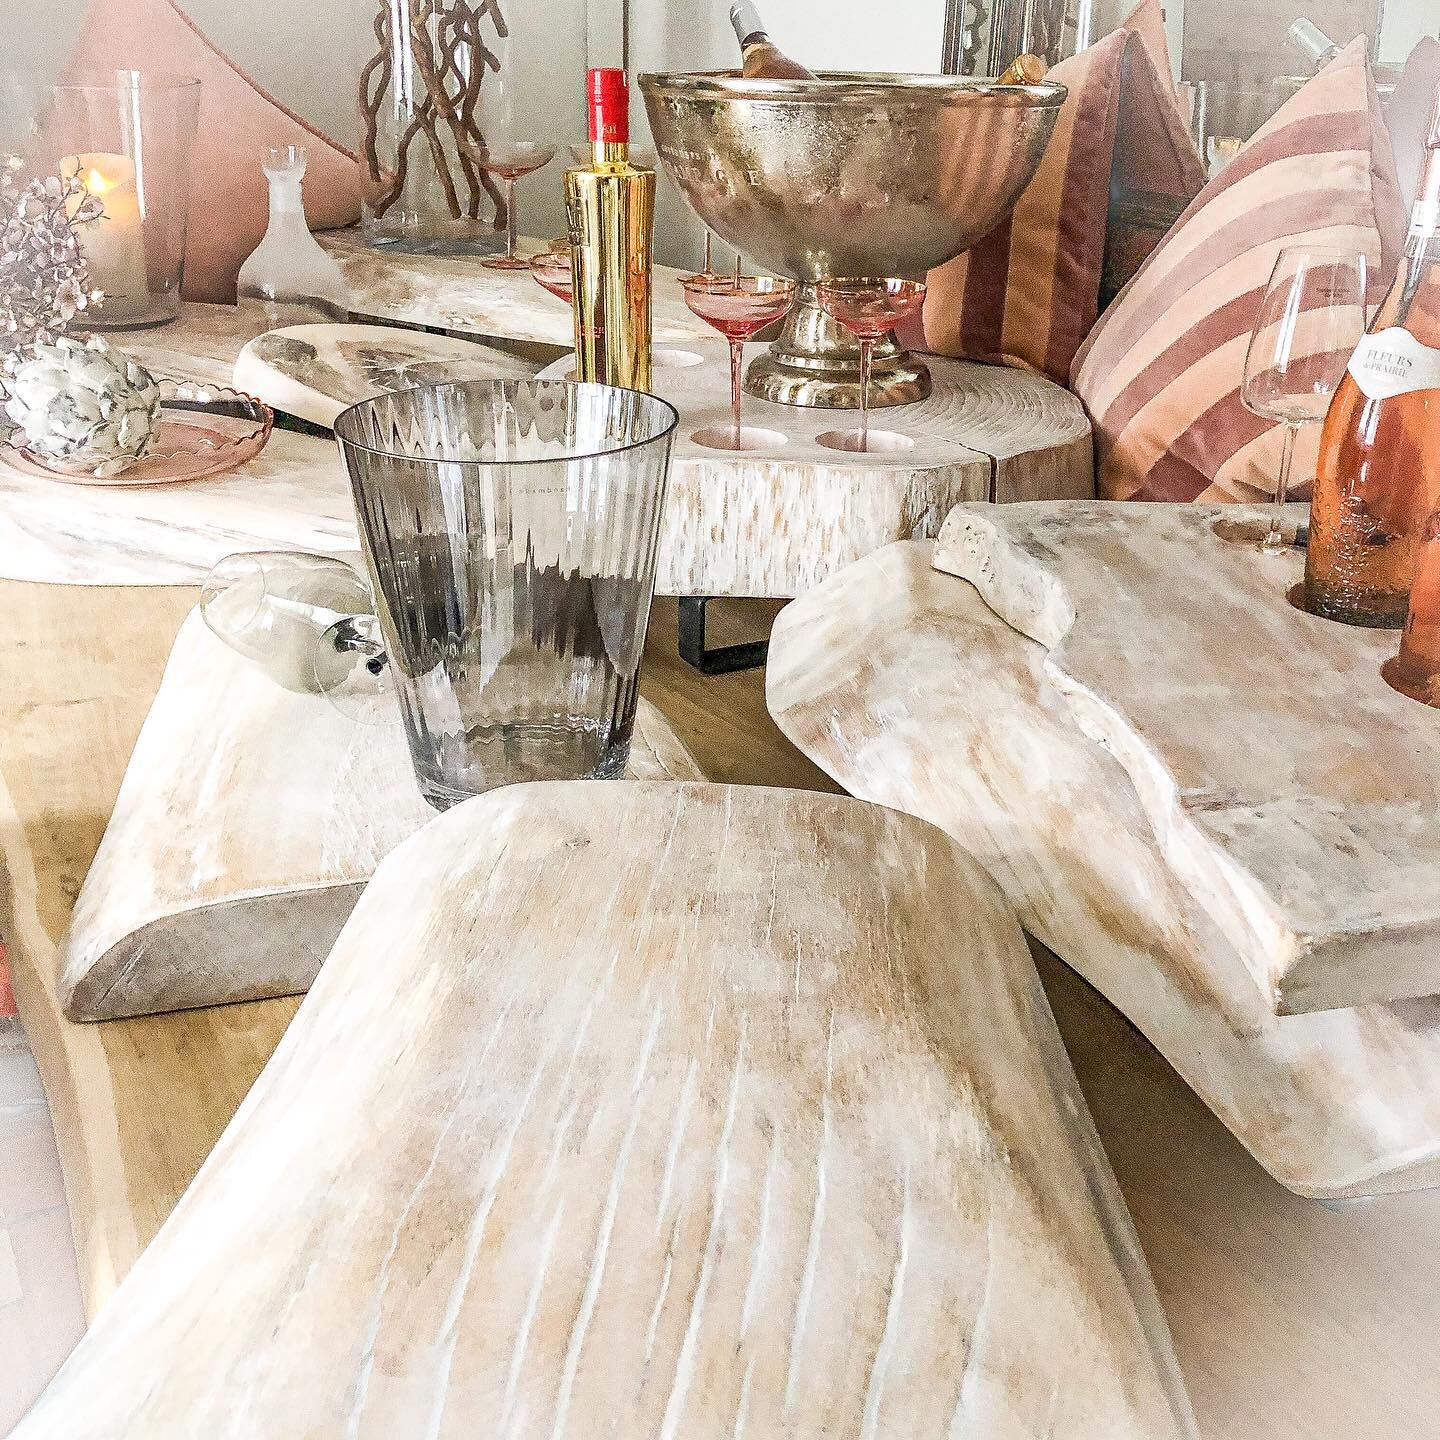 These beautiful boards are part of &ldquo;The Industrial Collection&rdquo; Aged Cotswolds Oak individually handcrafted and finished with a limed affect to create a very soft subtle finish to these &ldquo;Statement Pieces&rdquo; look absolutely gorgeo